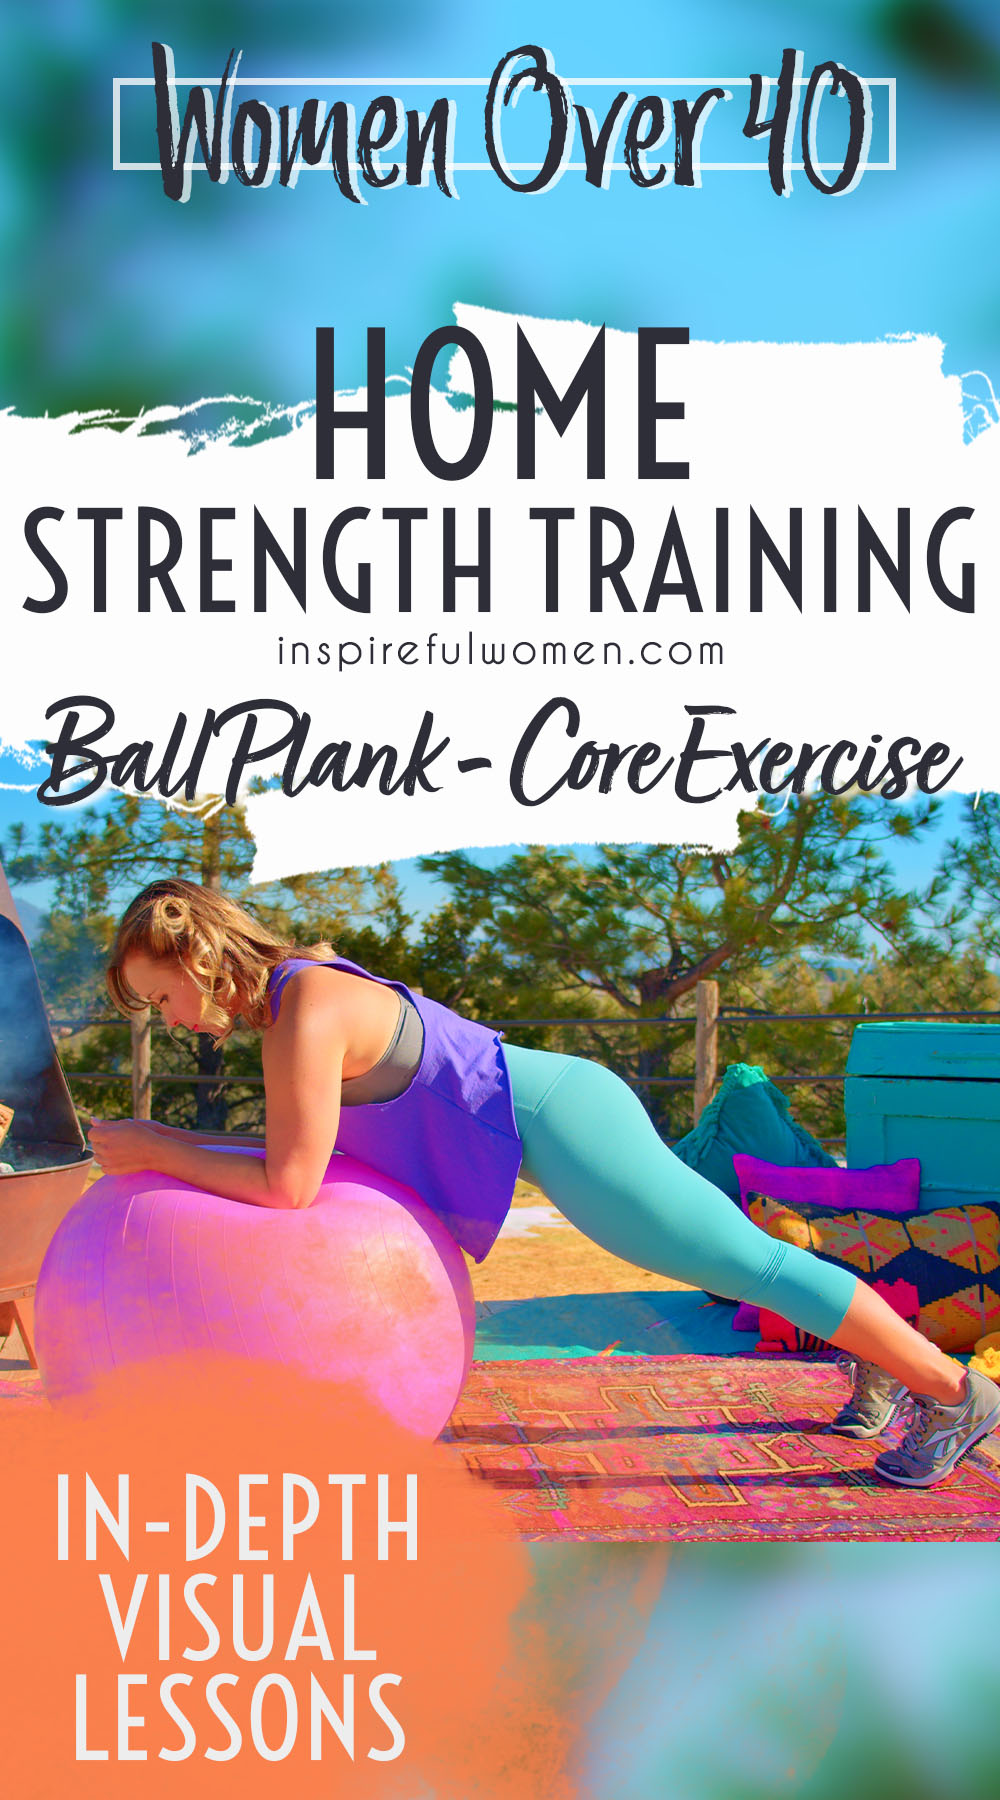 toes-forearm-stability-ball-plank-neutral-spine-core-strength-training-women-40+